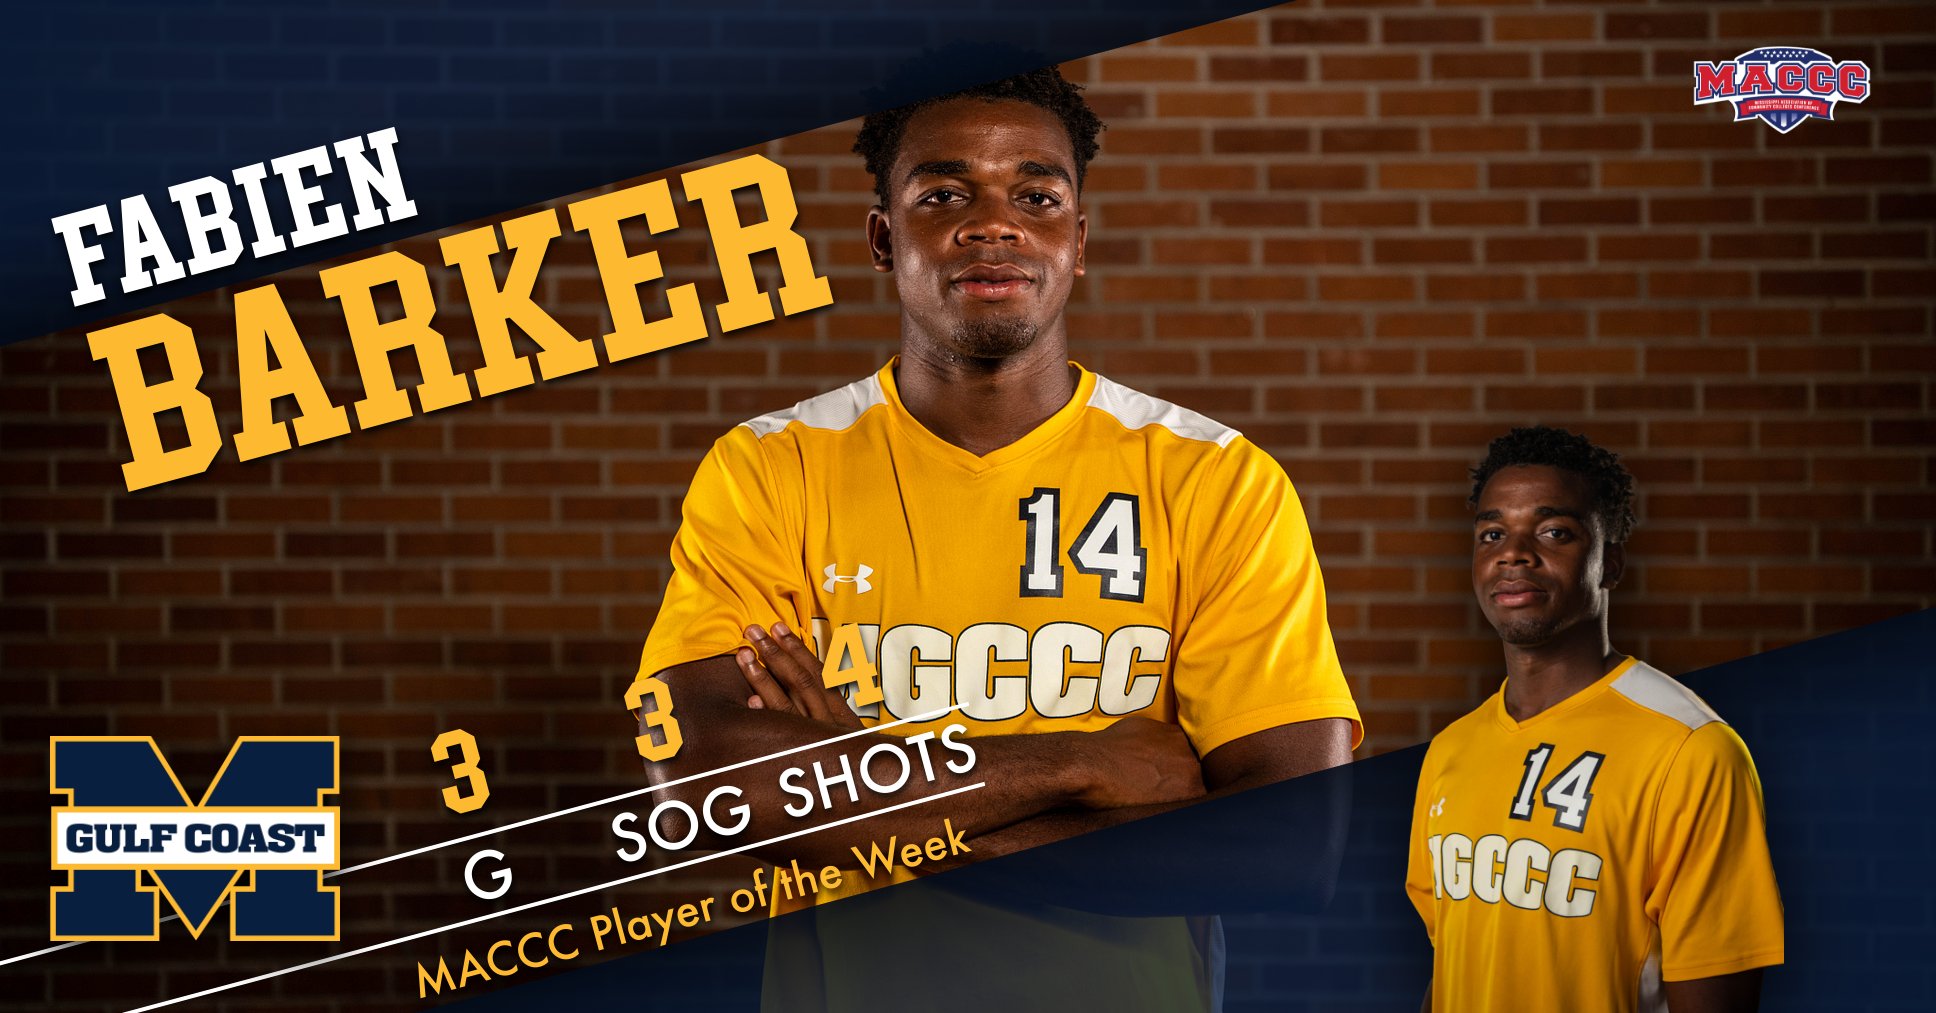 Barker named MACCC Player of the Week